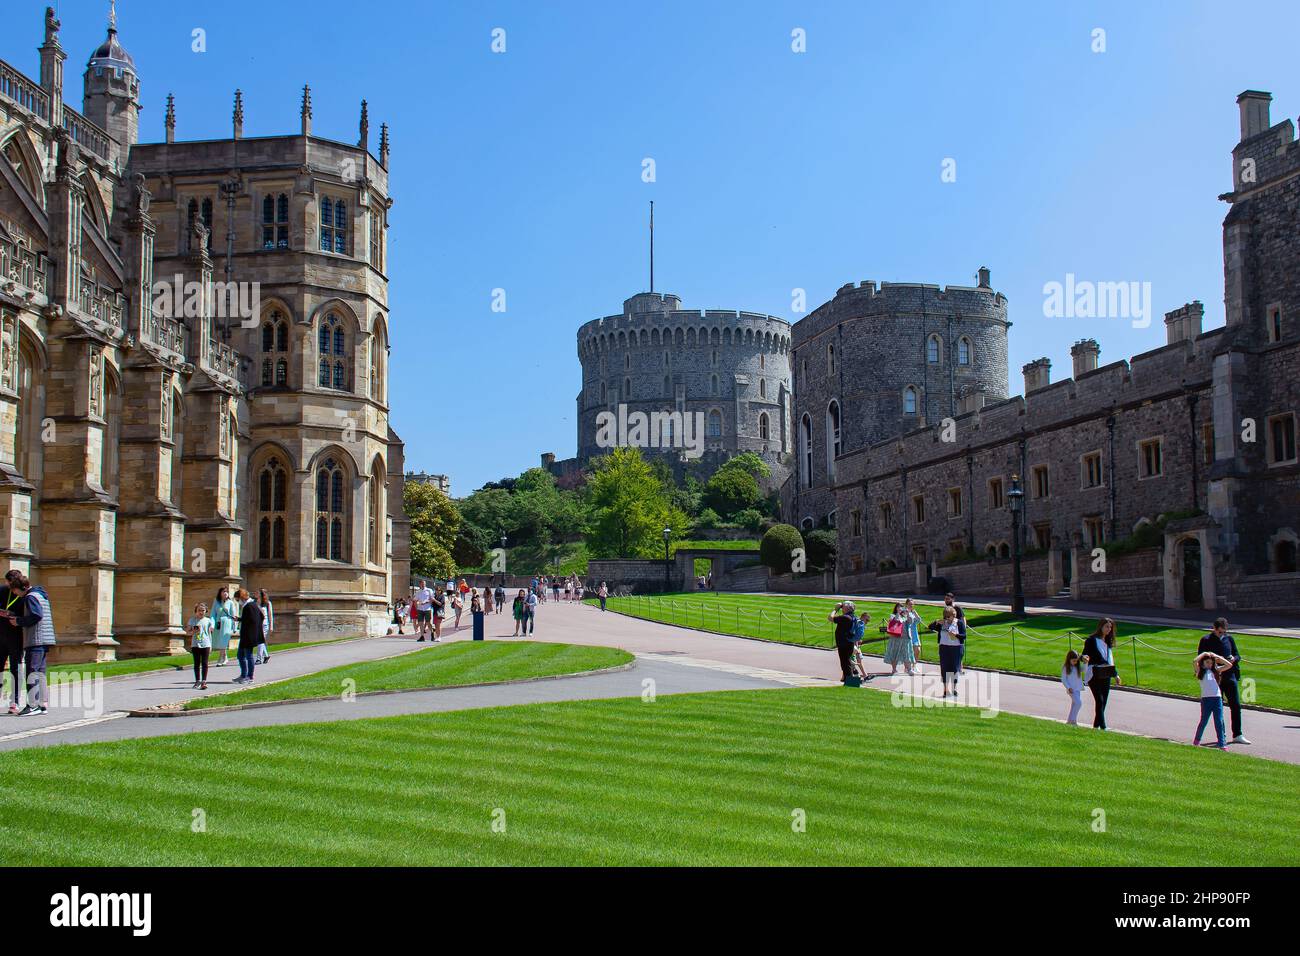 Visitors walk on the pathways next to St Georges Chapel in the Lower Ward of Windsor Castle, UK.  The Round Tower can be seen looming above the path. Stock Photo